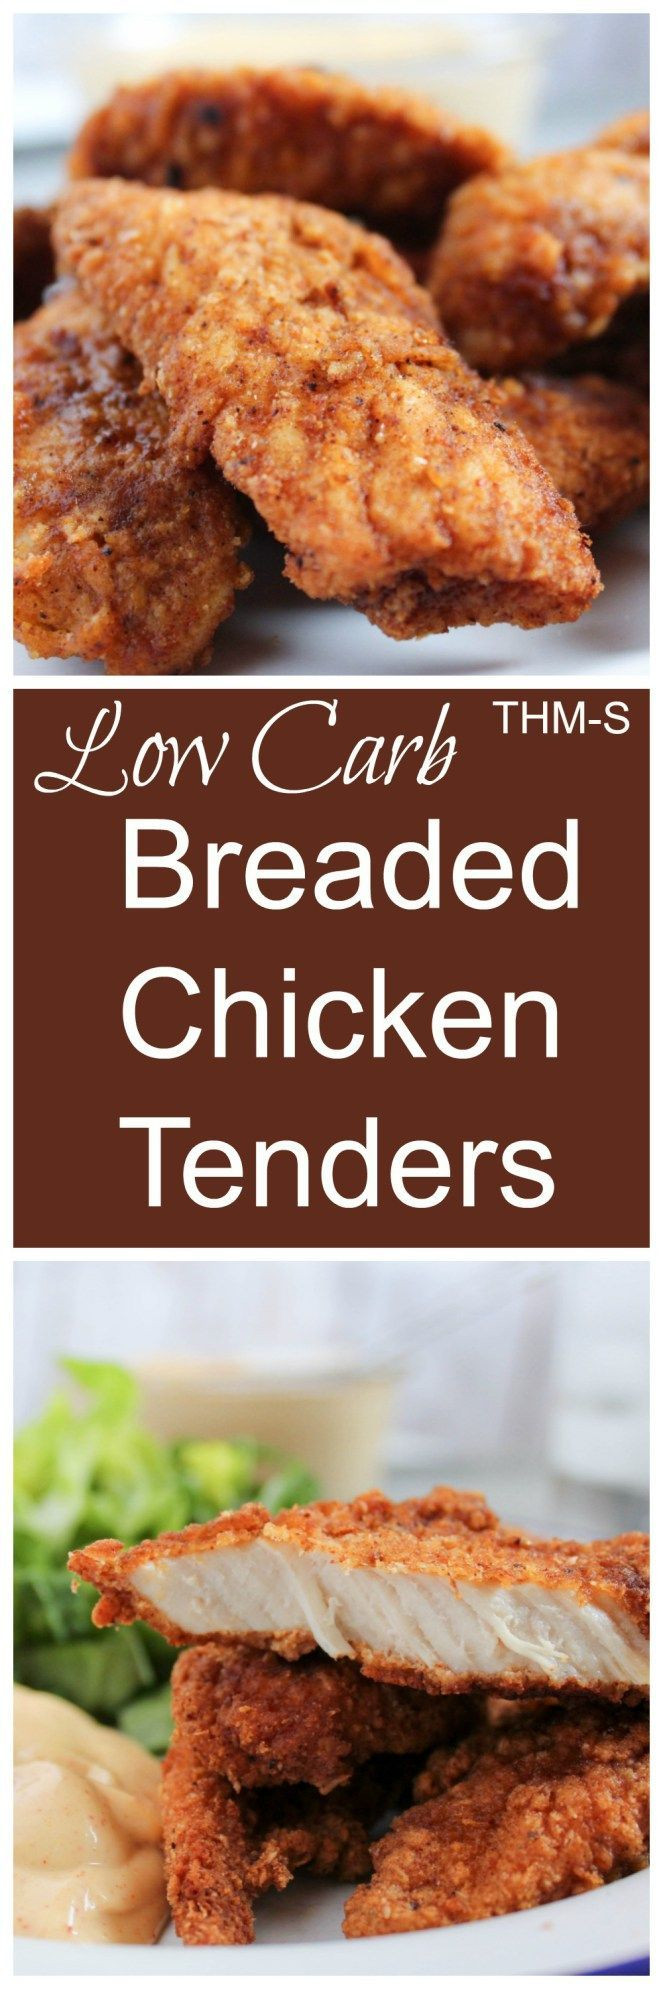 Diabetic Fried Chicken
 Restaurant Style Breaded Chicken Tenders Low Carb THM S